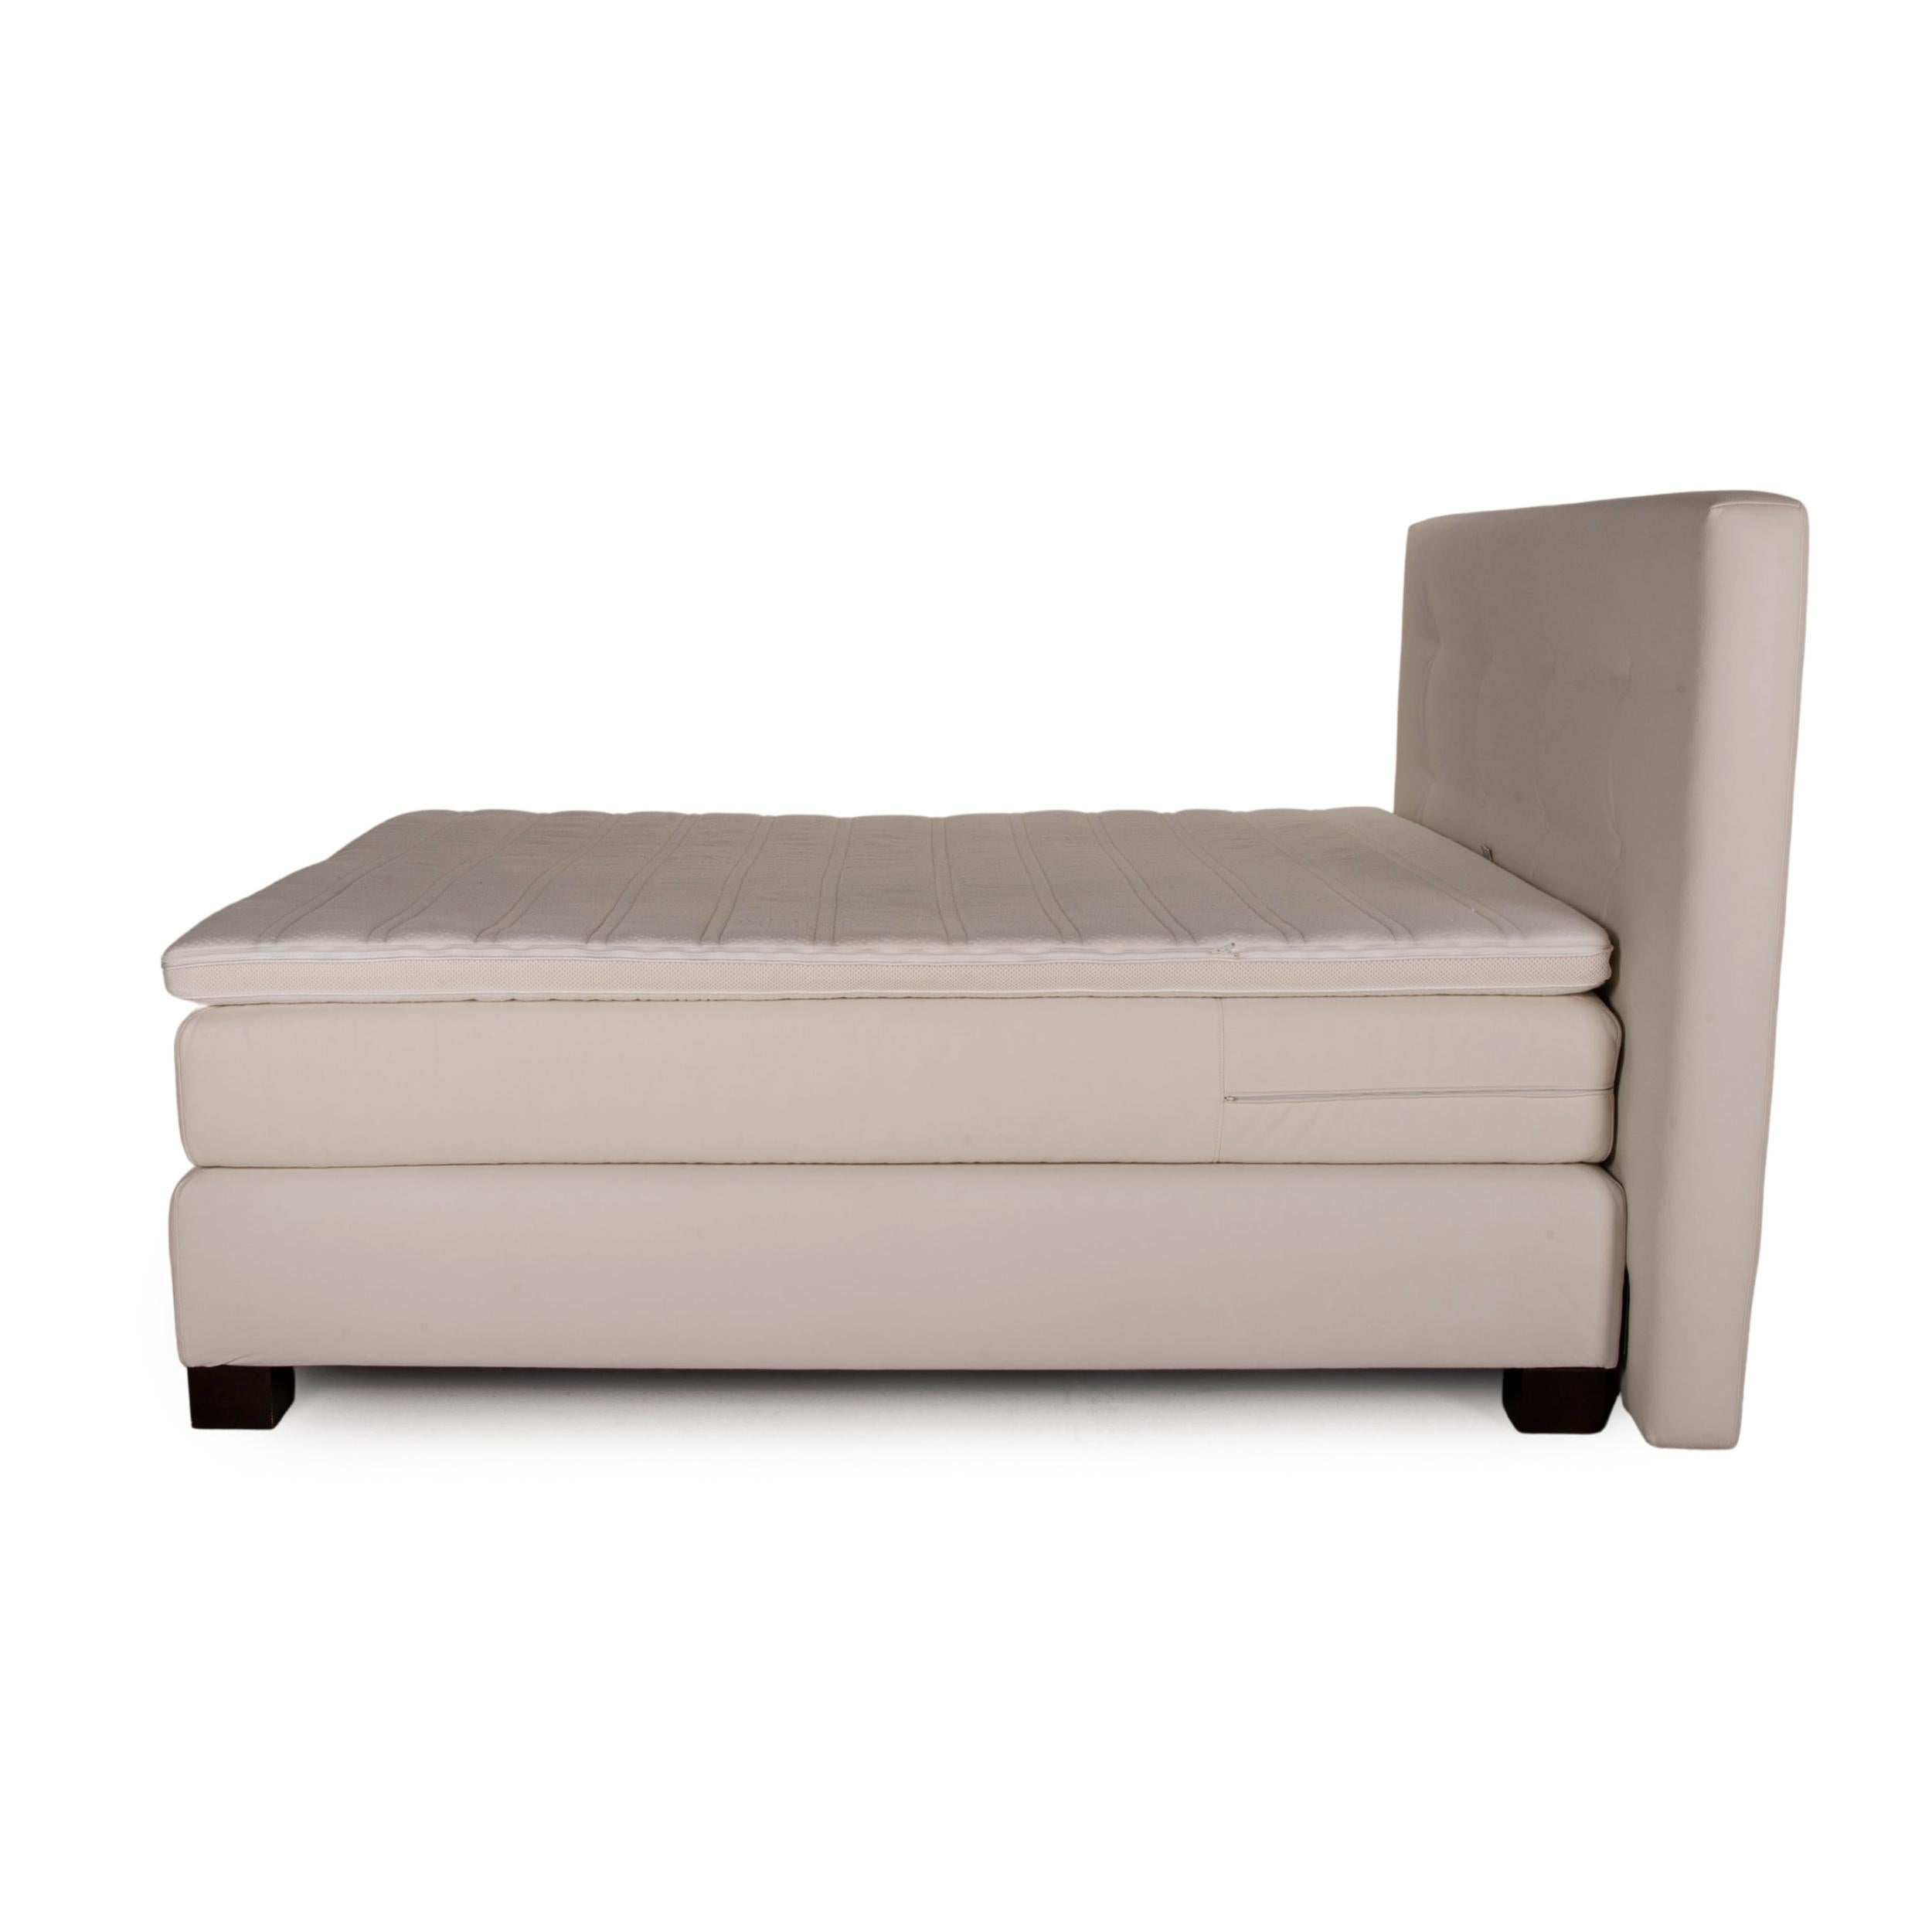 Velda Metropolitan Fabric Bed White Box Spring Bed In Good Condition For Sale In Cologne, DE